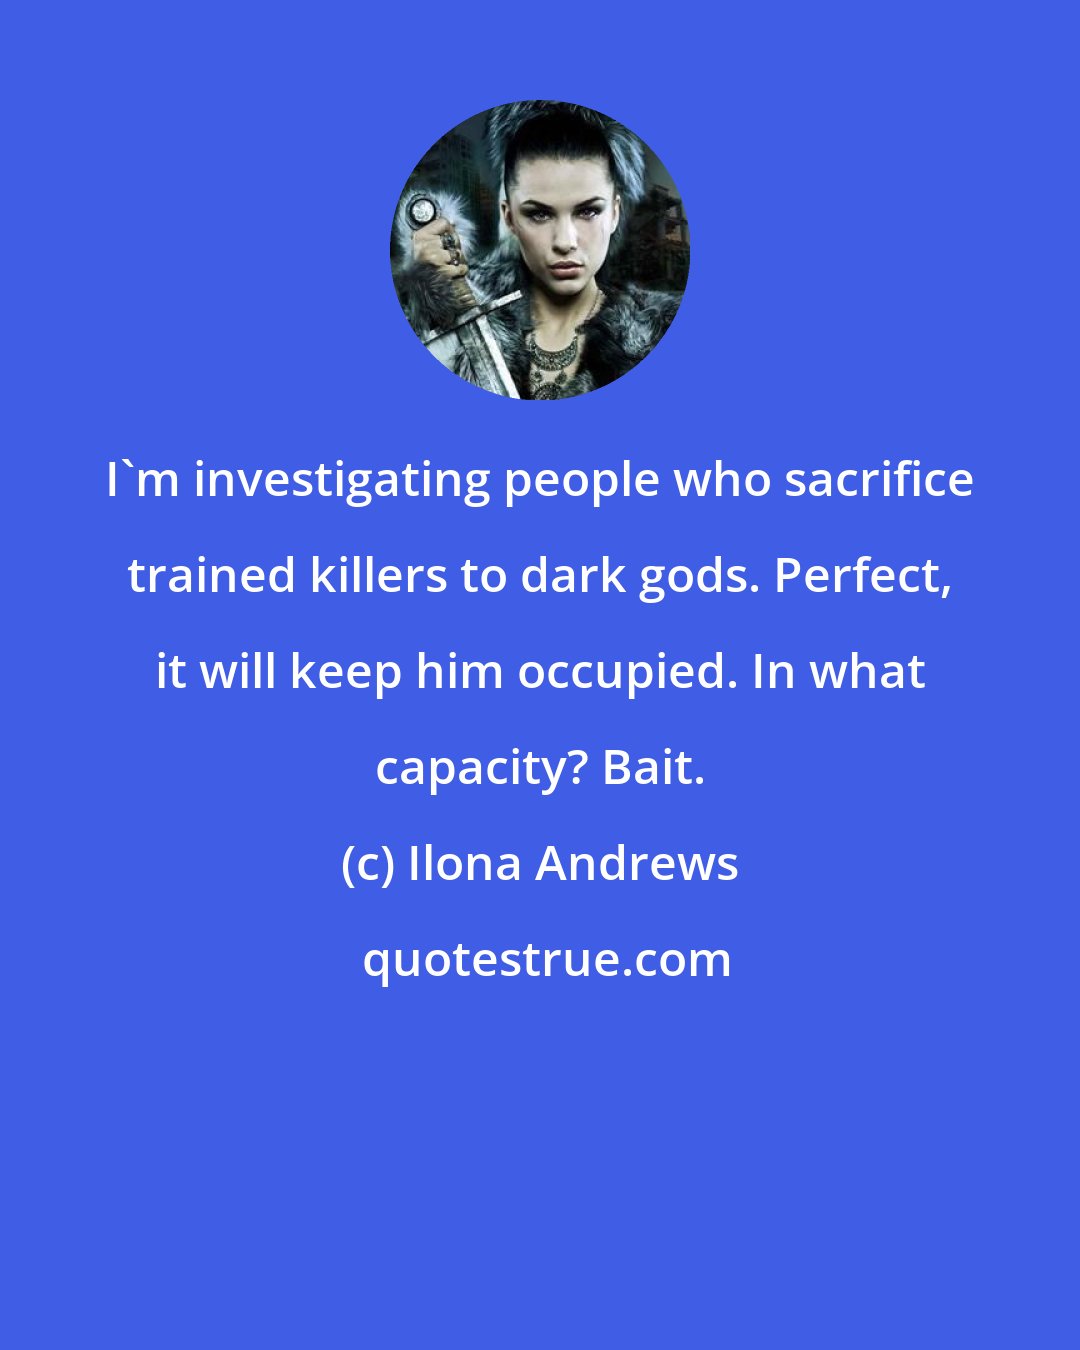 Ilona Andrews: I'm investigating people who sacrifice trained killers to dark gods. Perfect, it will keep him occupied. In what capacity? Bait.